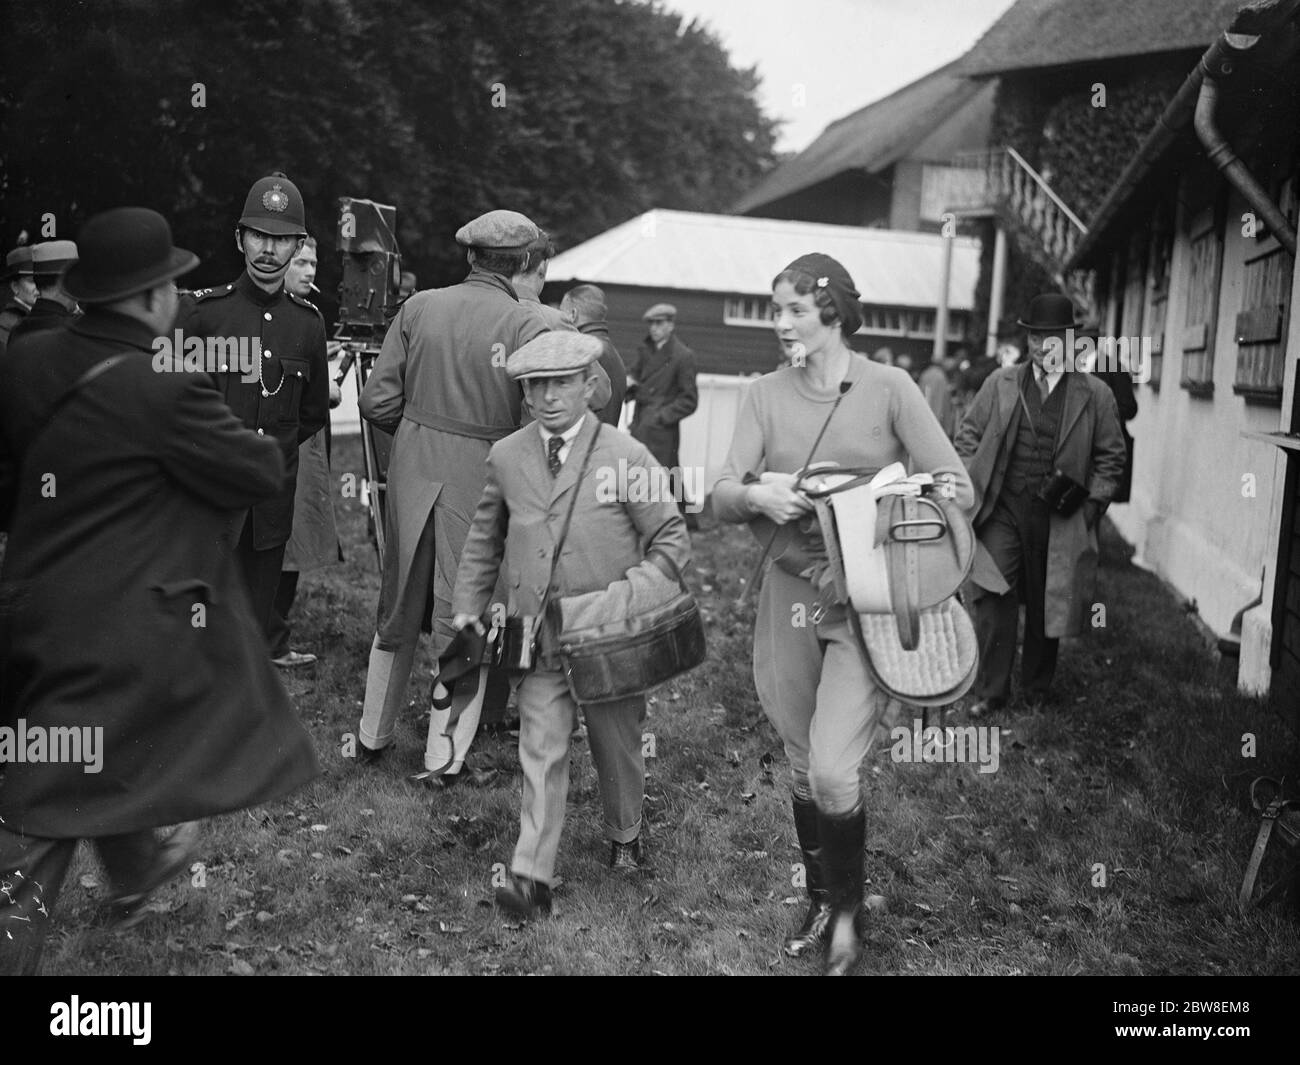 Women jockey 's in Historic town plate . Miss Madden , daughter of Otto Madden , the famous jockey , one of the riders with her father at Newmarket . 13 October 1932 Stock Photo